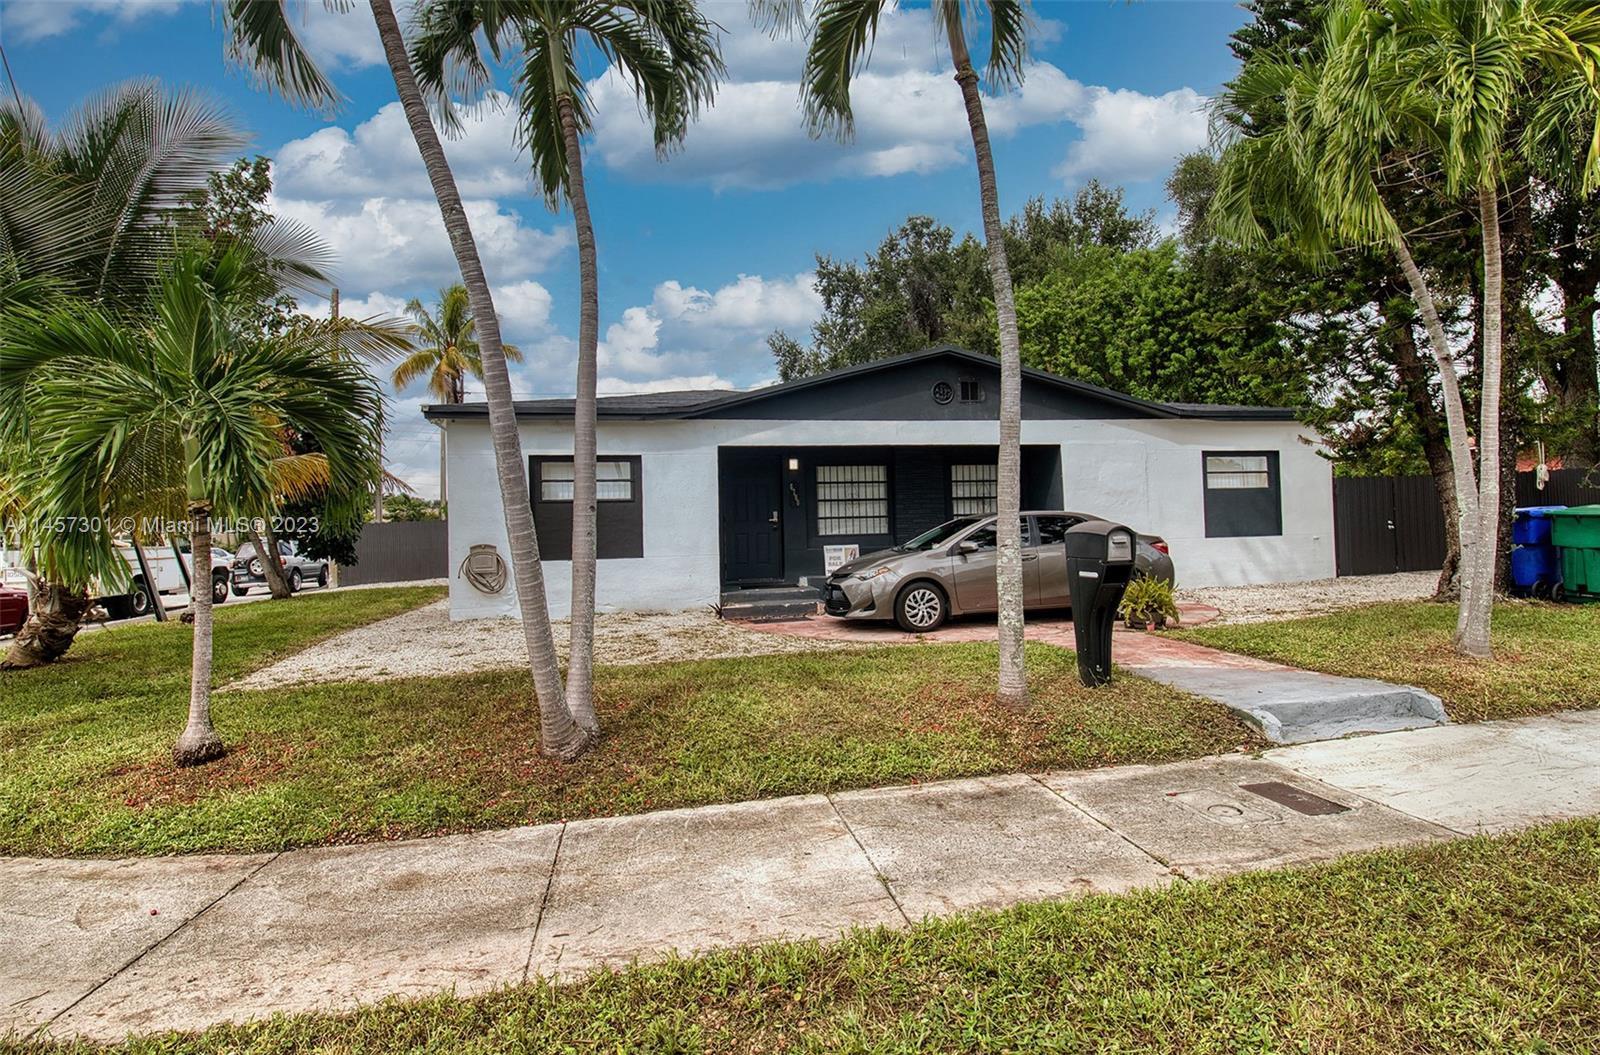 Photo of 6700 NW 5th Ave in Miami, FL